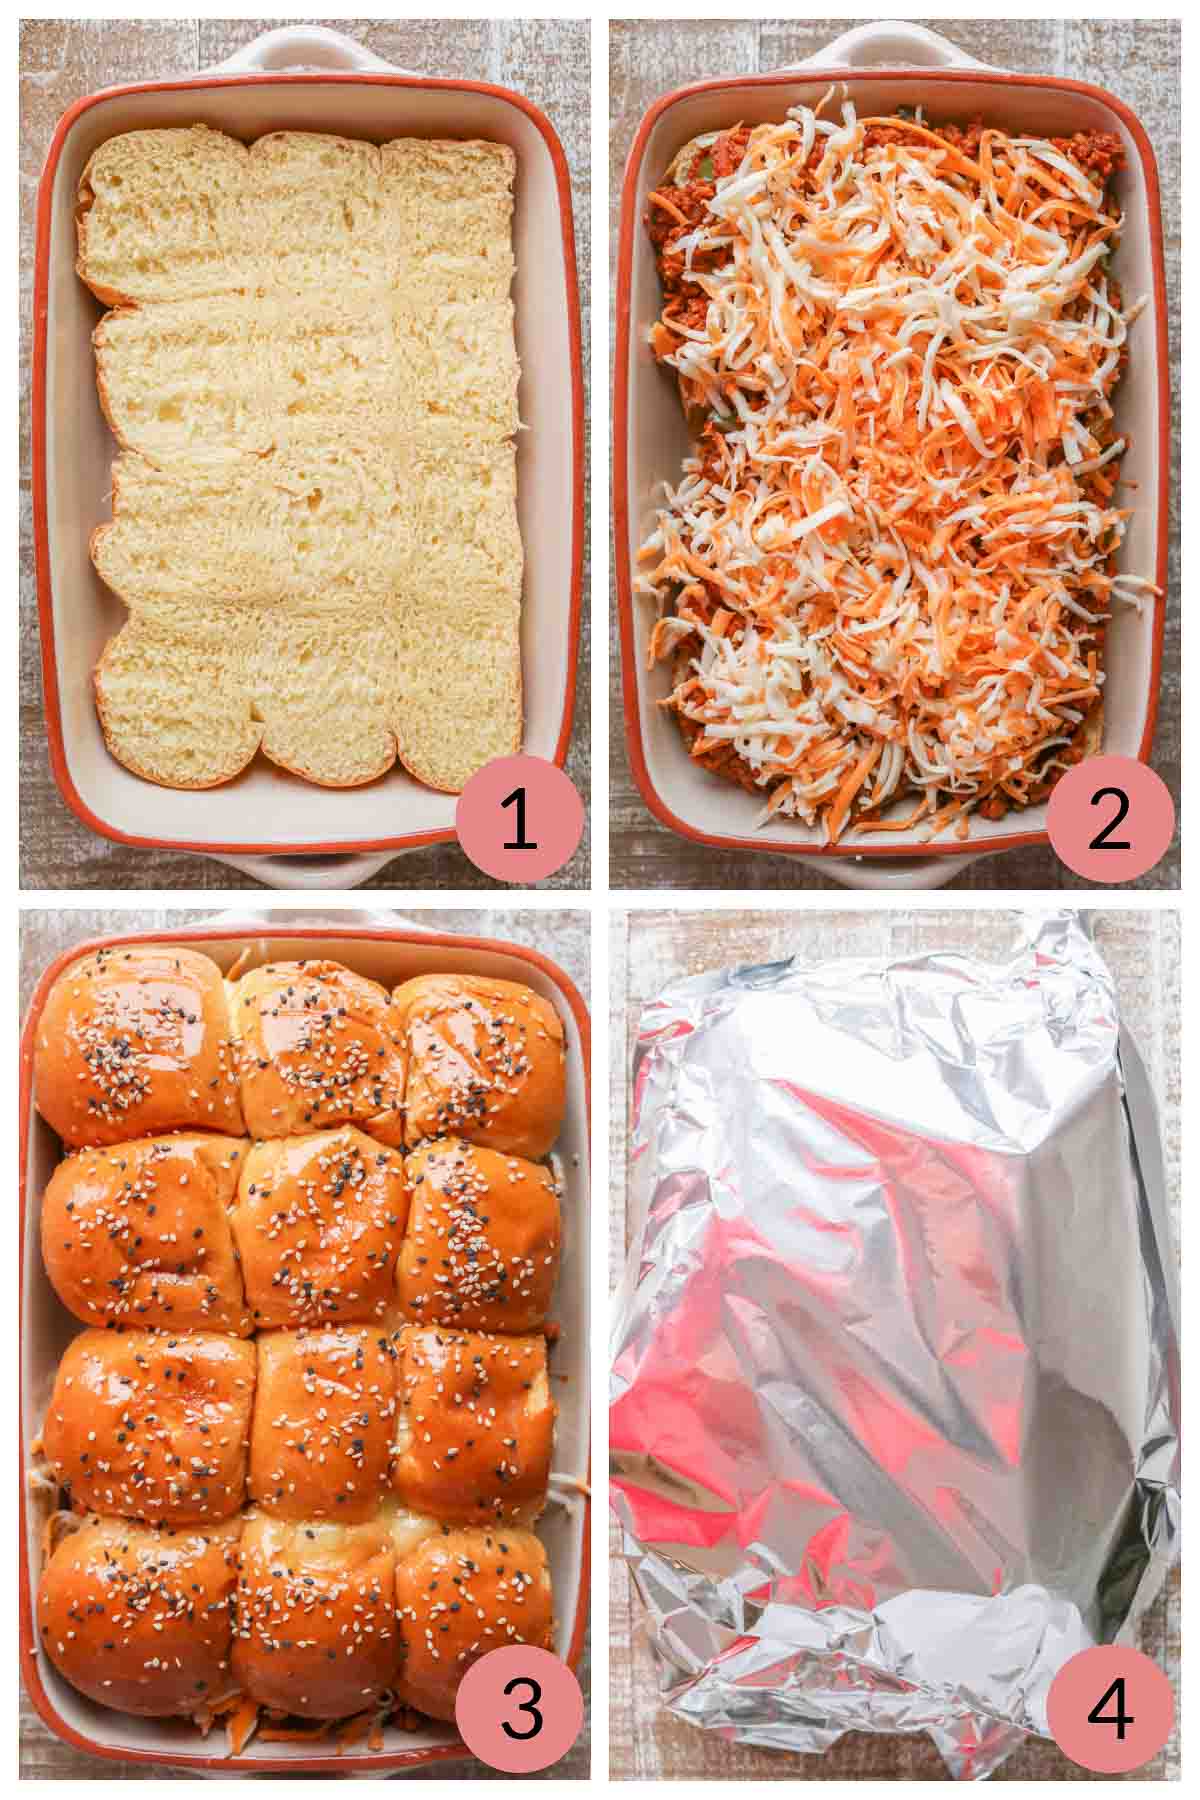 Collage of steps to assemble and bake sloppy joe sliders.